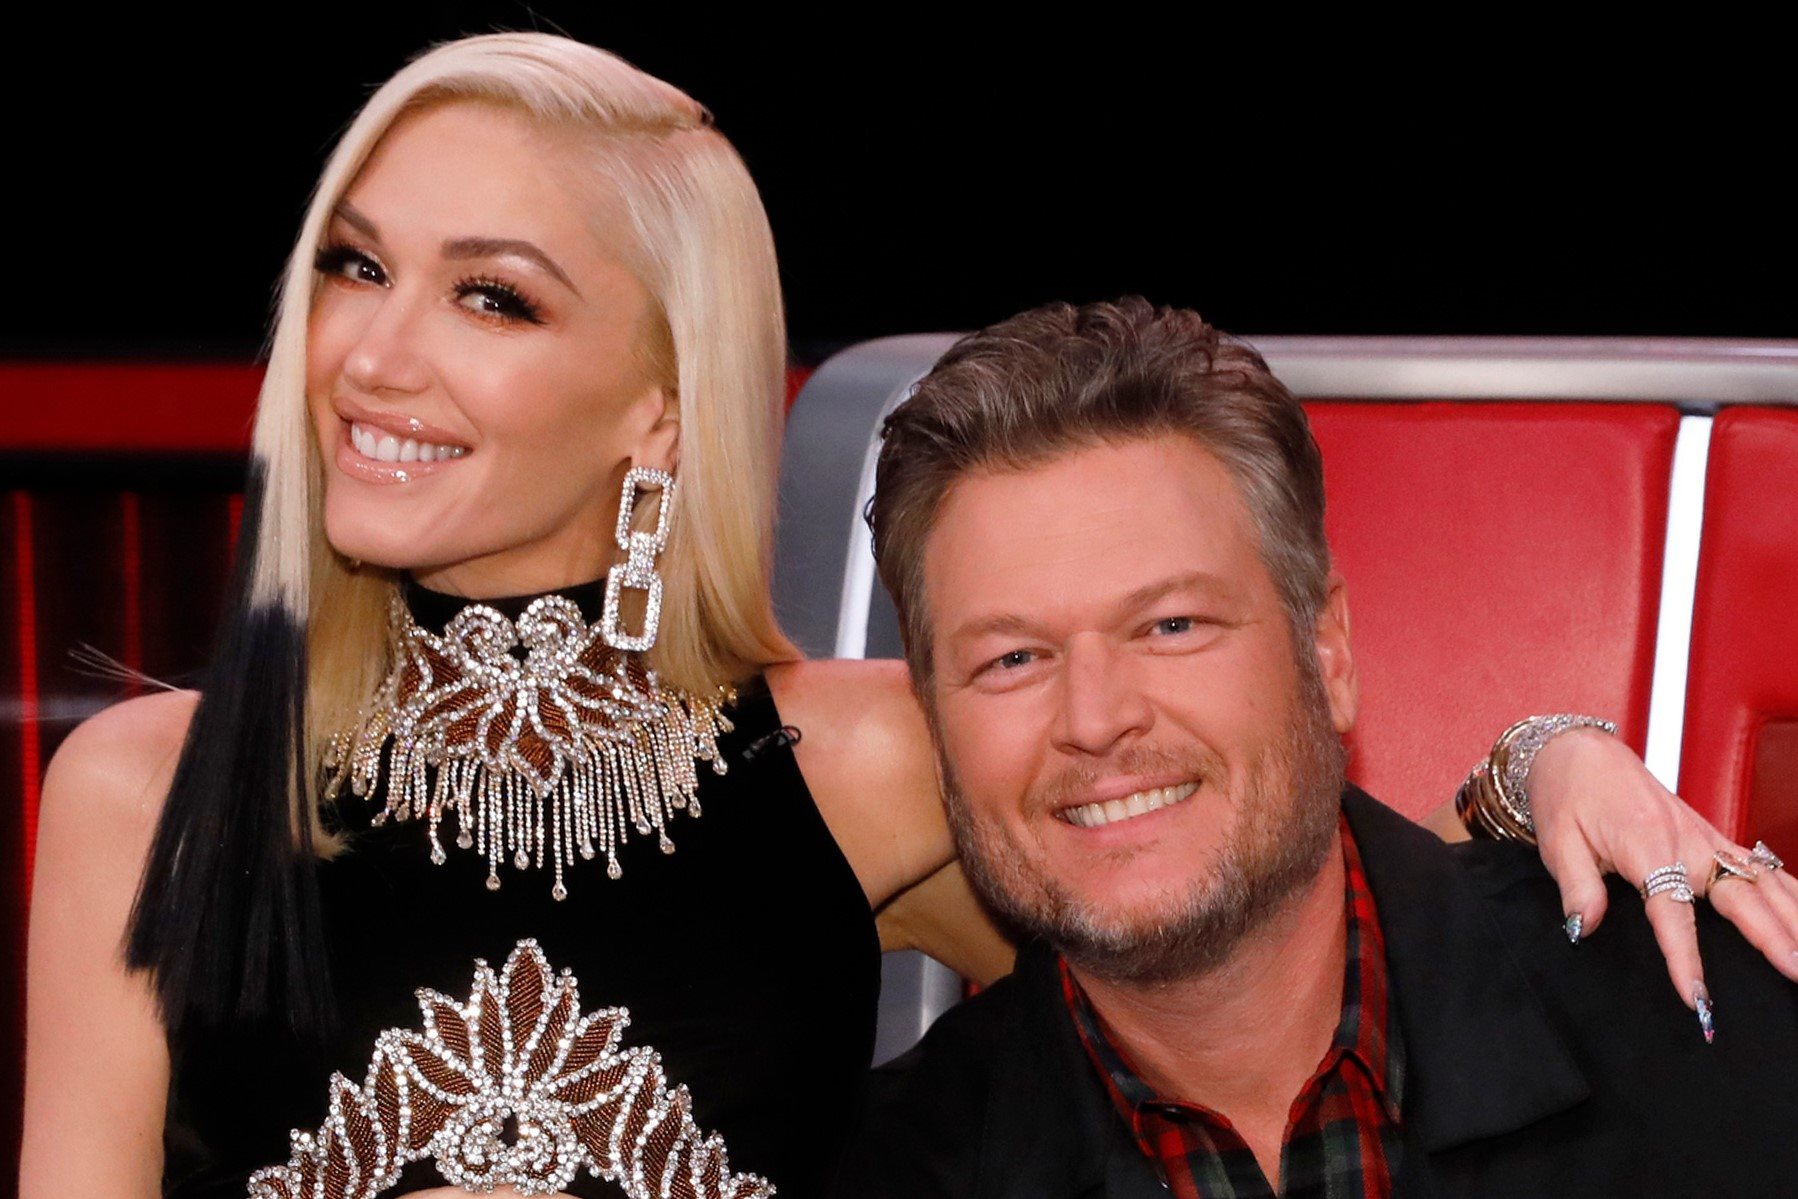 Blake Shelton And Gwen Stefani Face Off In Epic Barmageddon Rematch – Who Will Emerge Victorious?